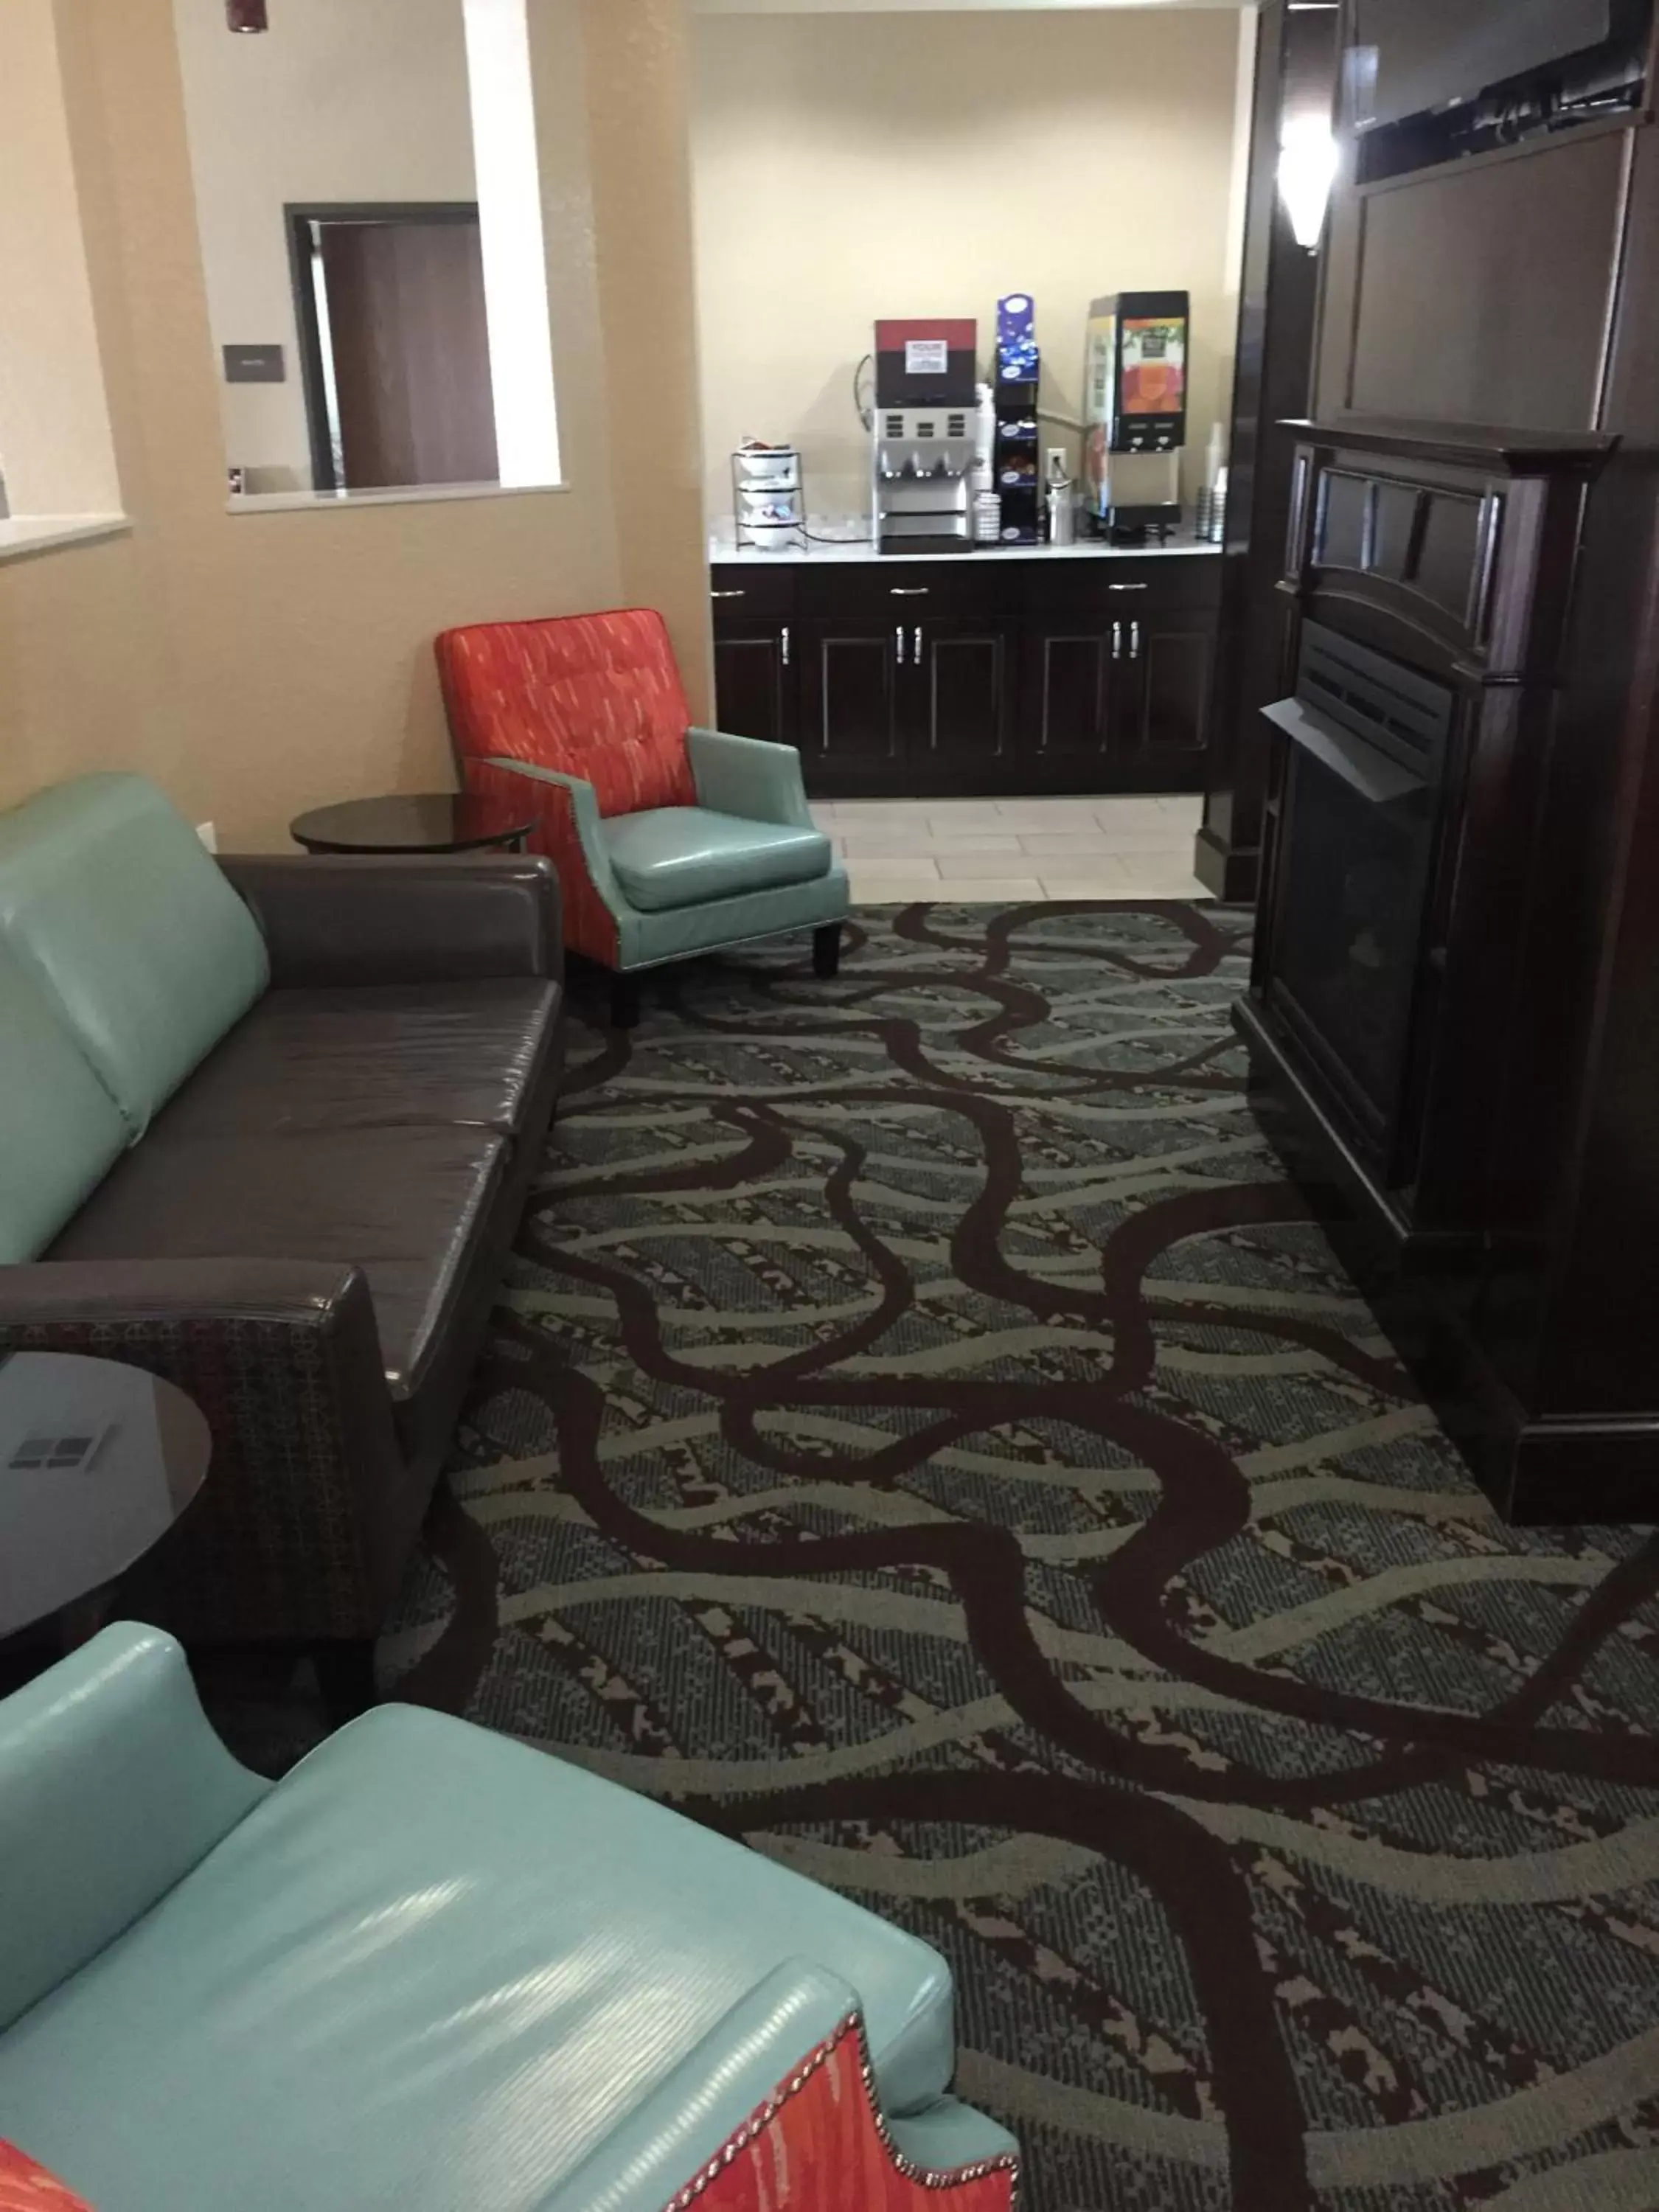 Lounge or bar, Seating Area in Comfort Inn & Suites, White Settlement-Fort Worth West, TX